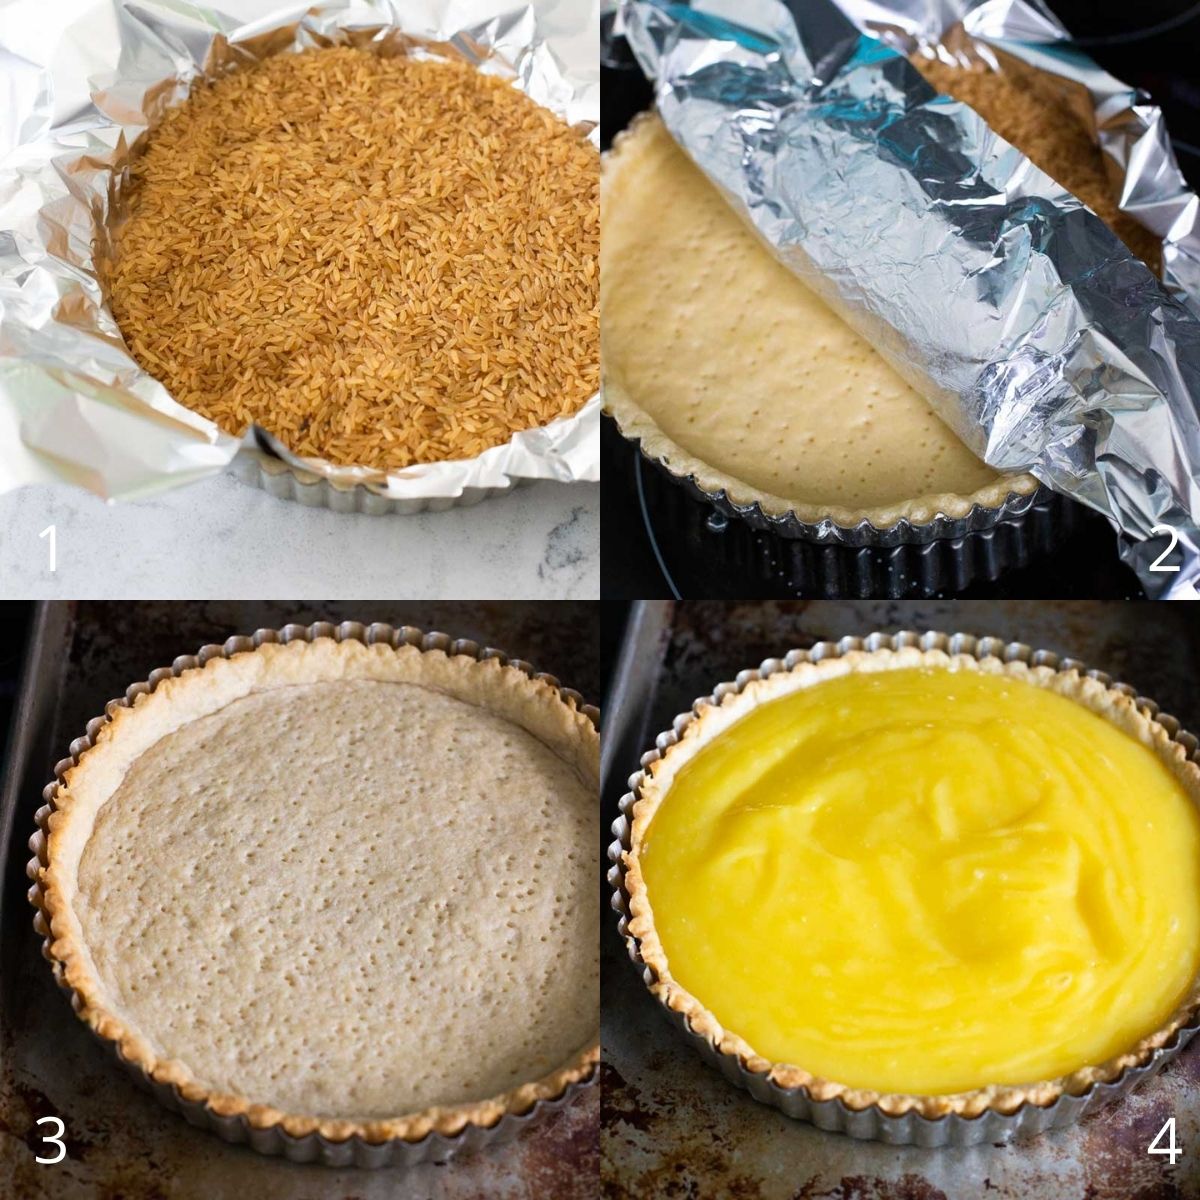 Step by step photos show how to fill the tart pan with dough, then line it with foil and rice, and bake.